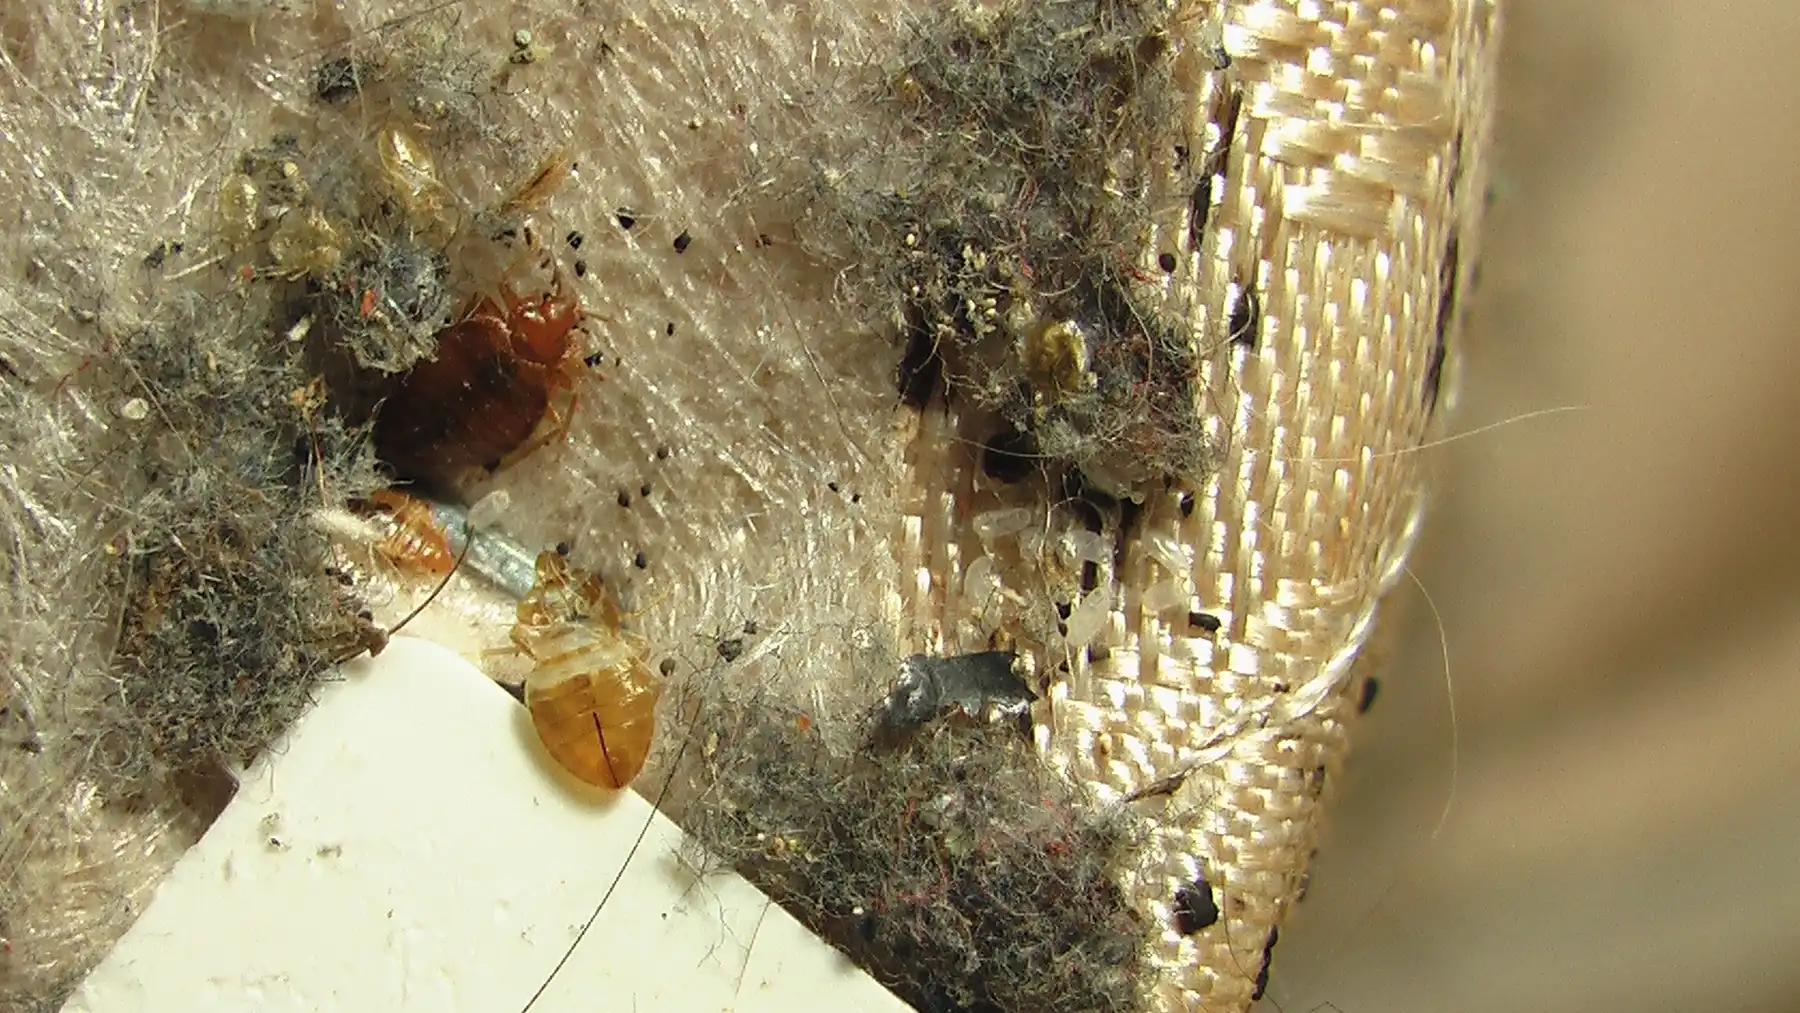 Bed bug infested box-spring showing lifecycle.